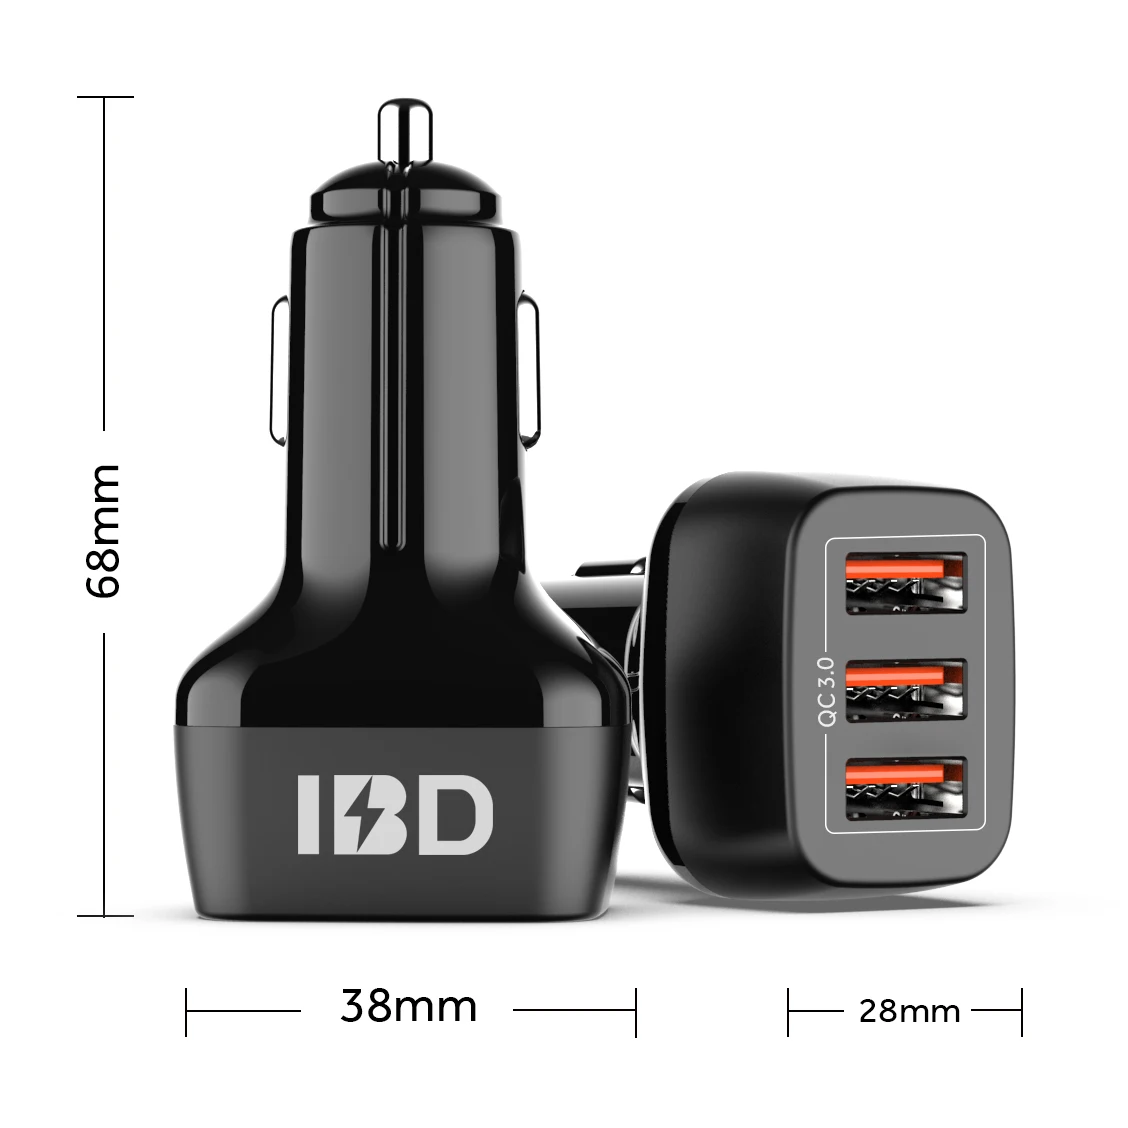 

IBD Qualcomm Quick Charge QC3.0 Portable Car Charger 3 Ports Smart Phone Electric Car Charger for mobile phone, Black and white or oem